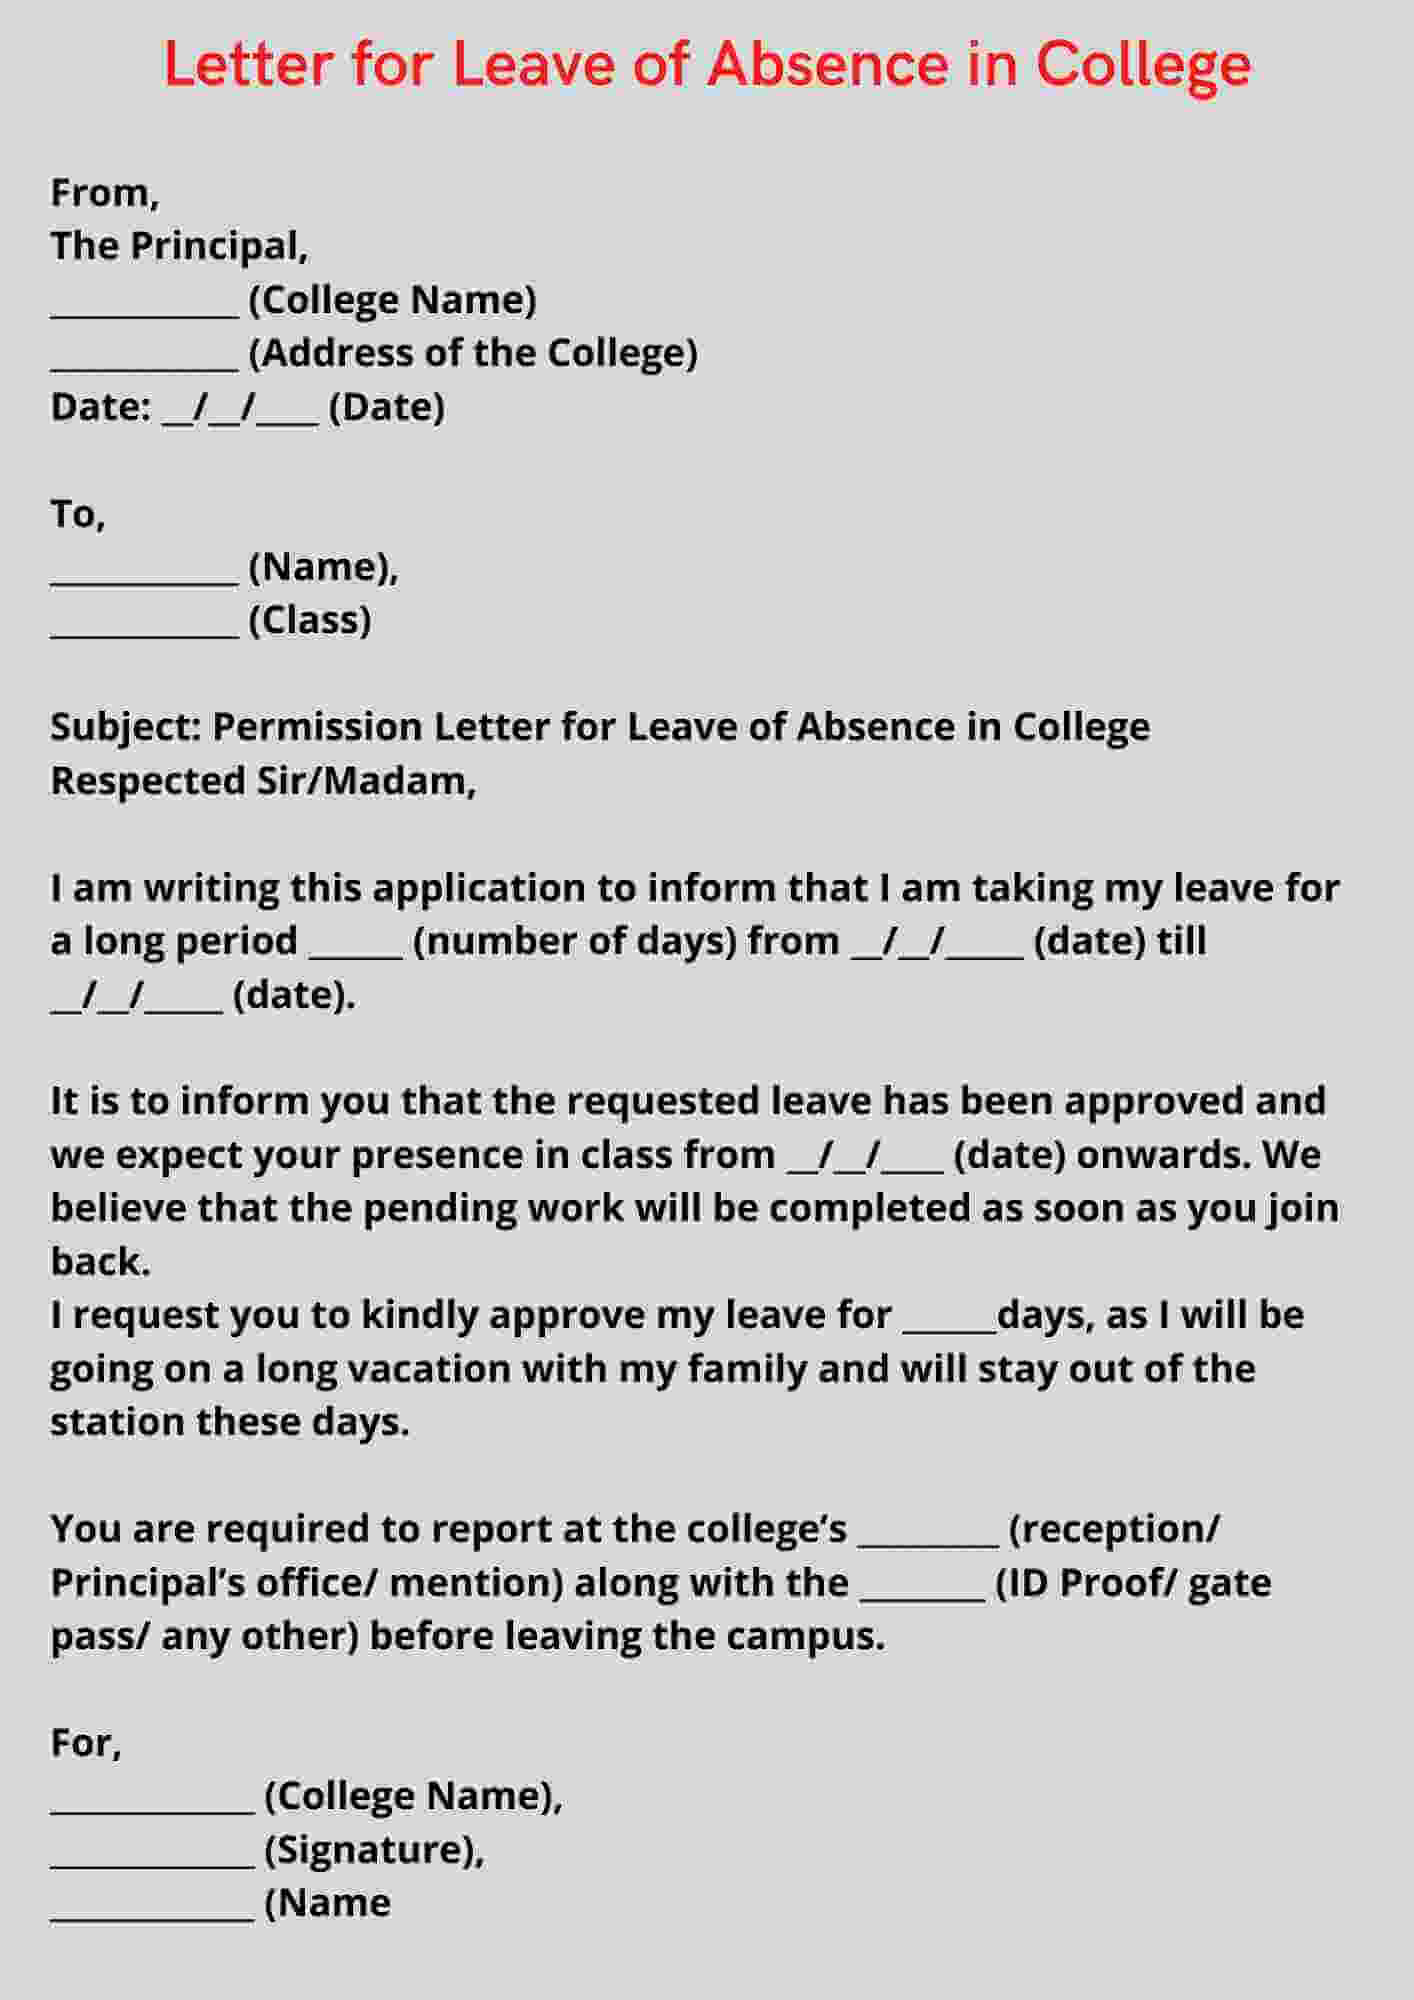 Letter for Leave of Absence in College